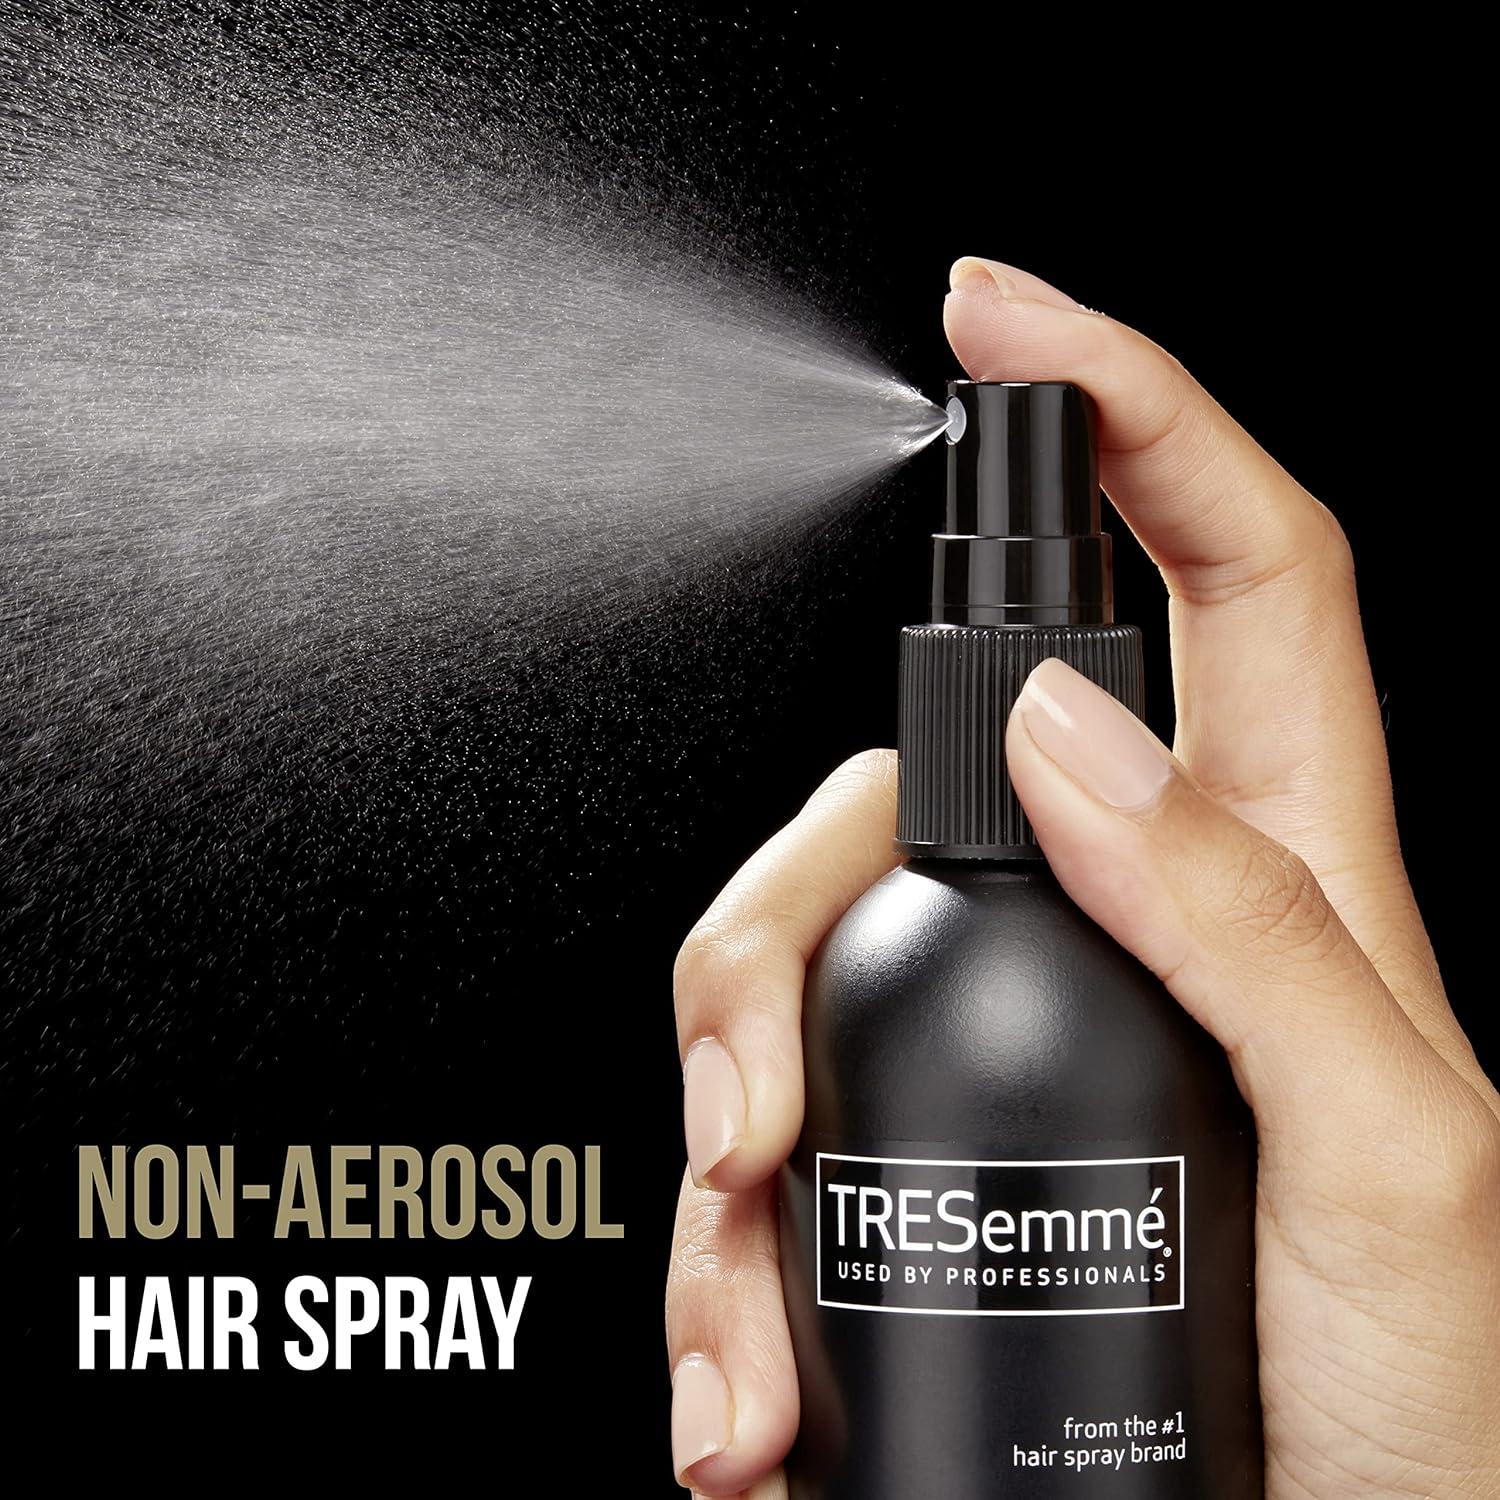 Buy TRESemme TRES Two Extra Hold Hair Spray at